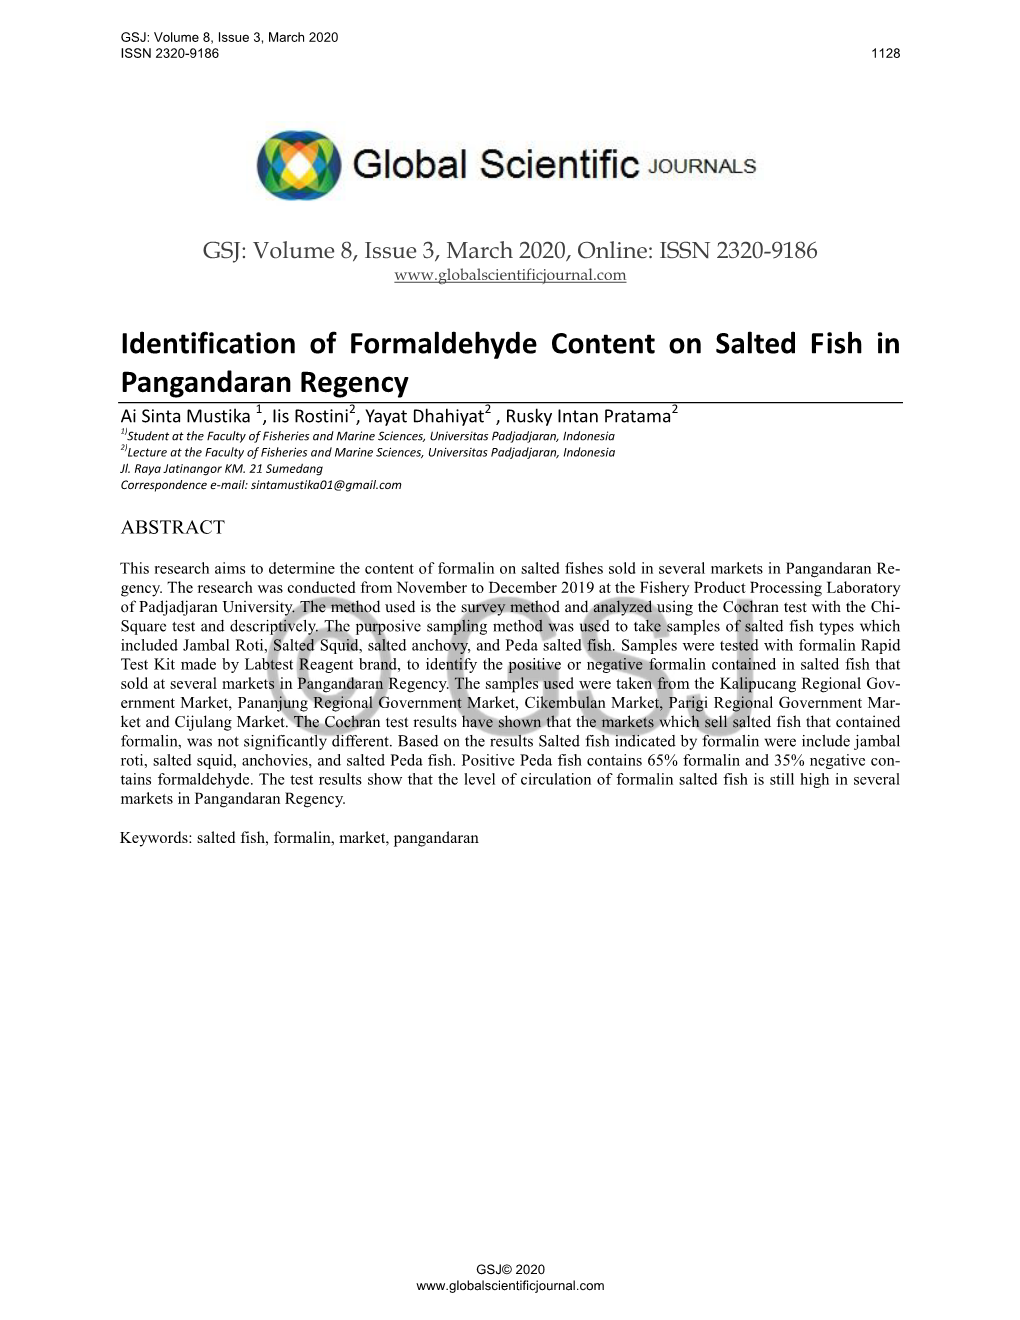 Identification of Formaldehyde Content